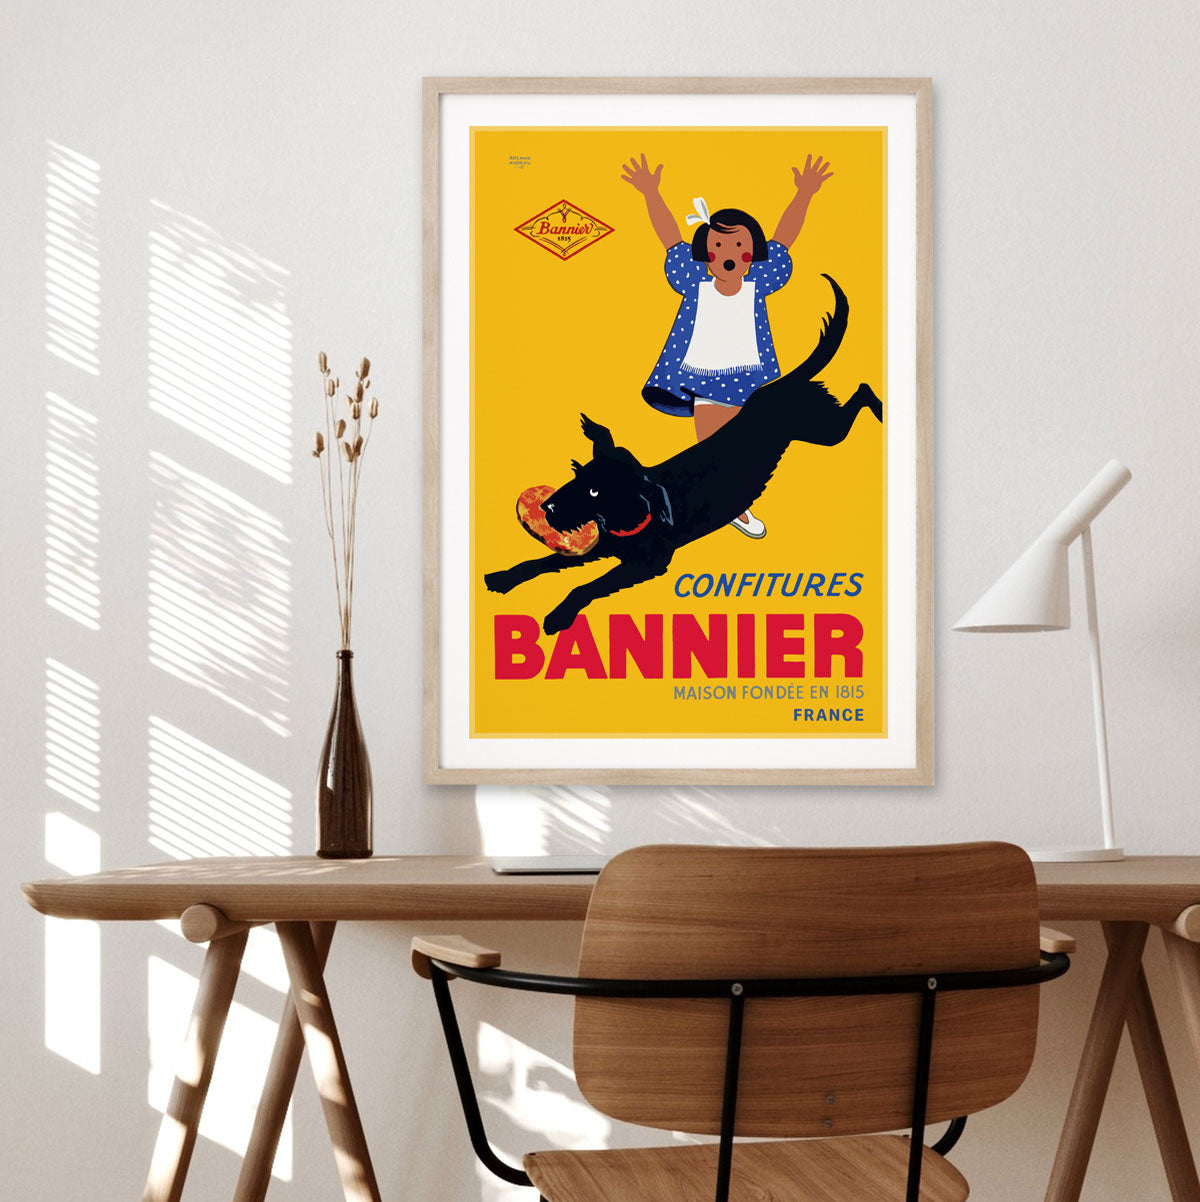 Bannier France retro vintage advertising poster from Places We Luv